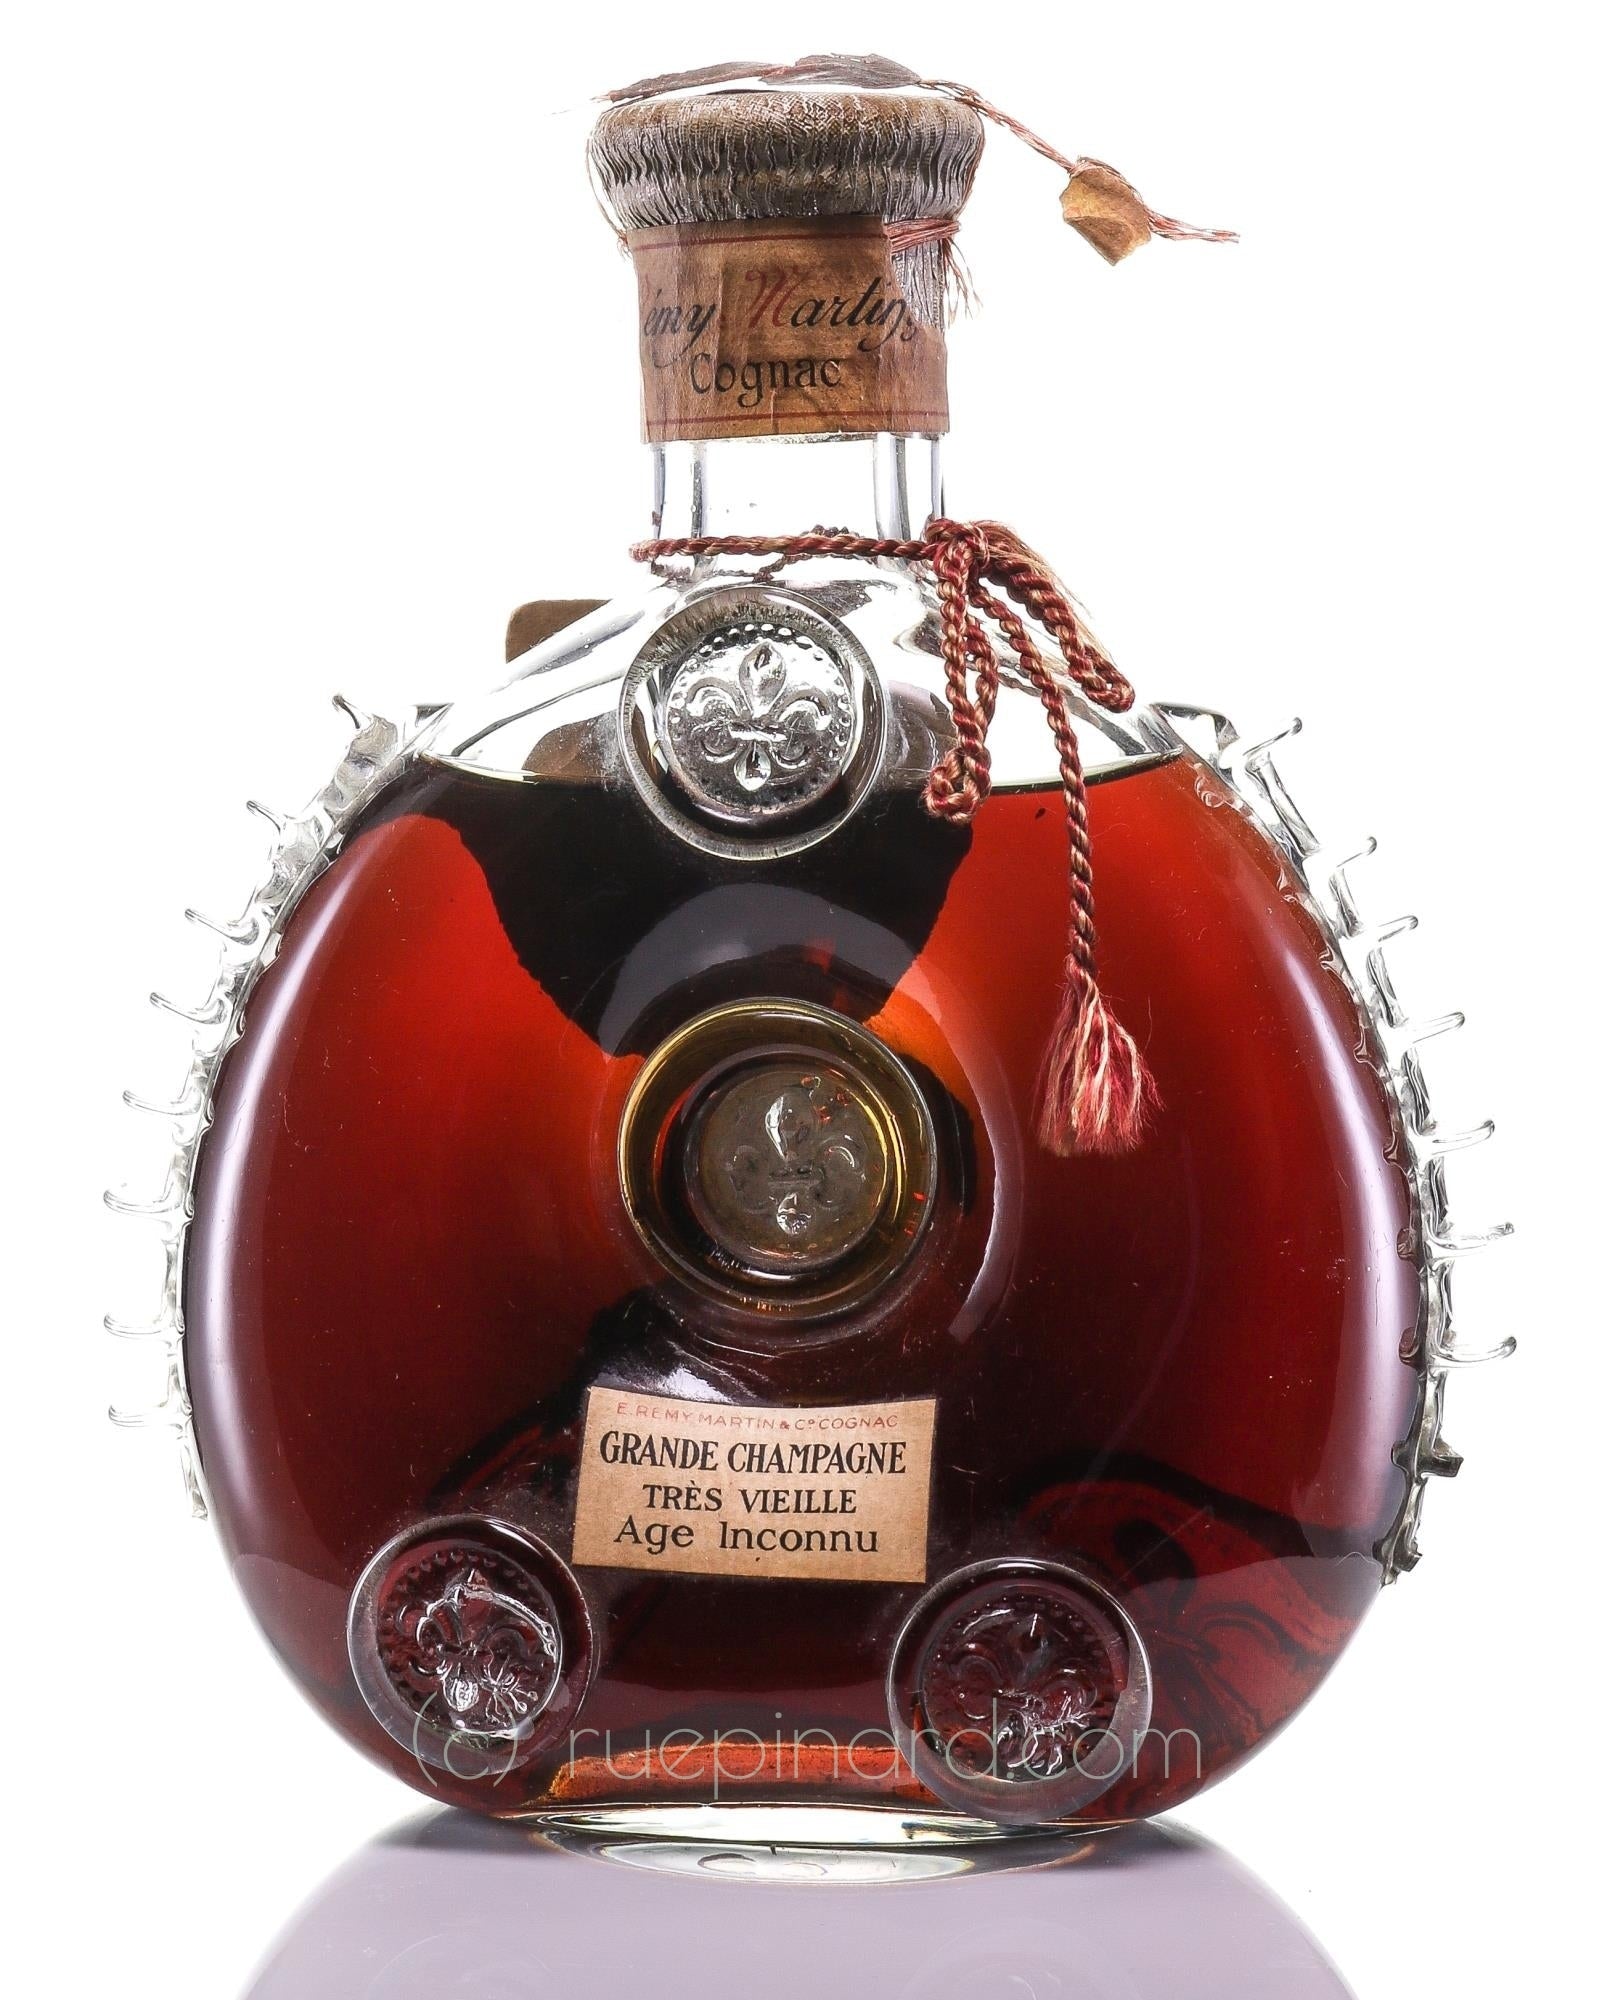 Rémy Martin Louis XIII Cognac 1938-1940 Tres Vieille Age Inconnu in  Baccarat Carafe